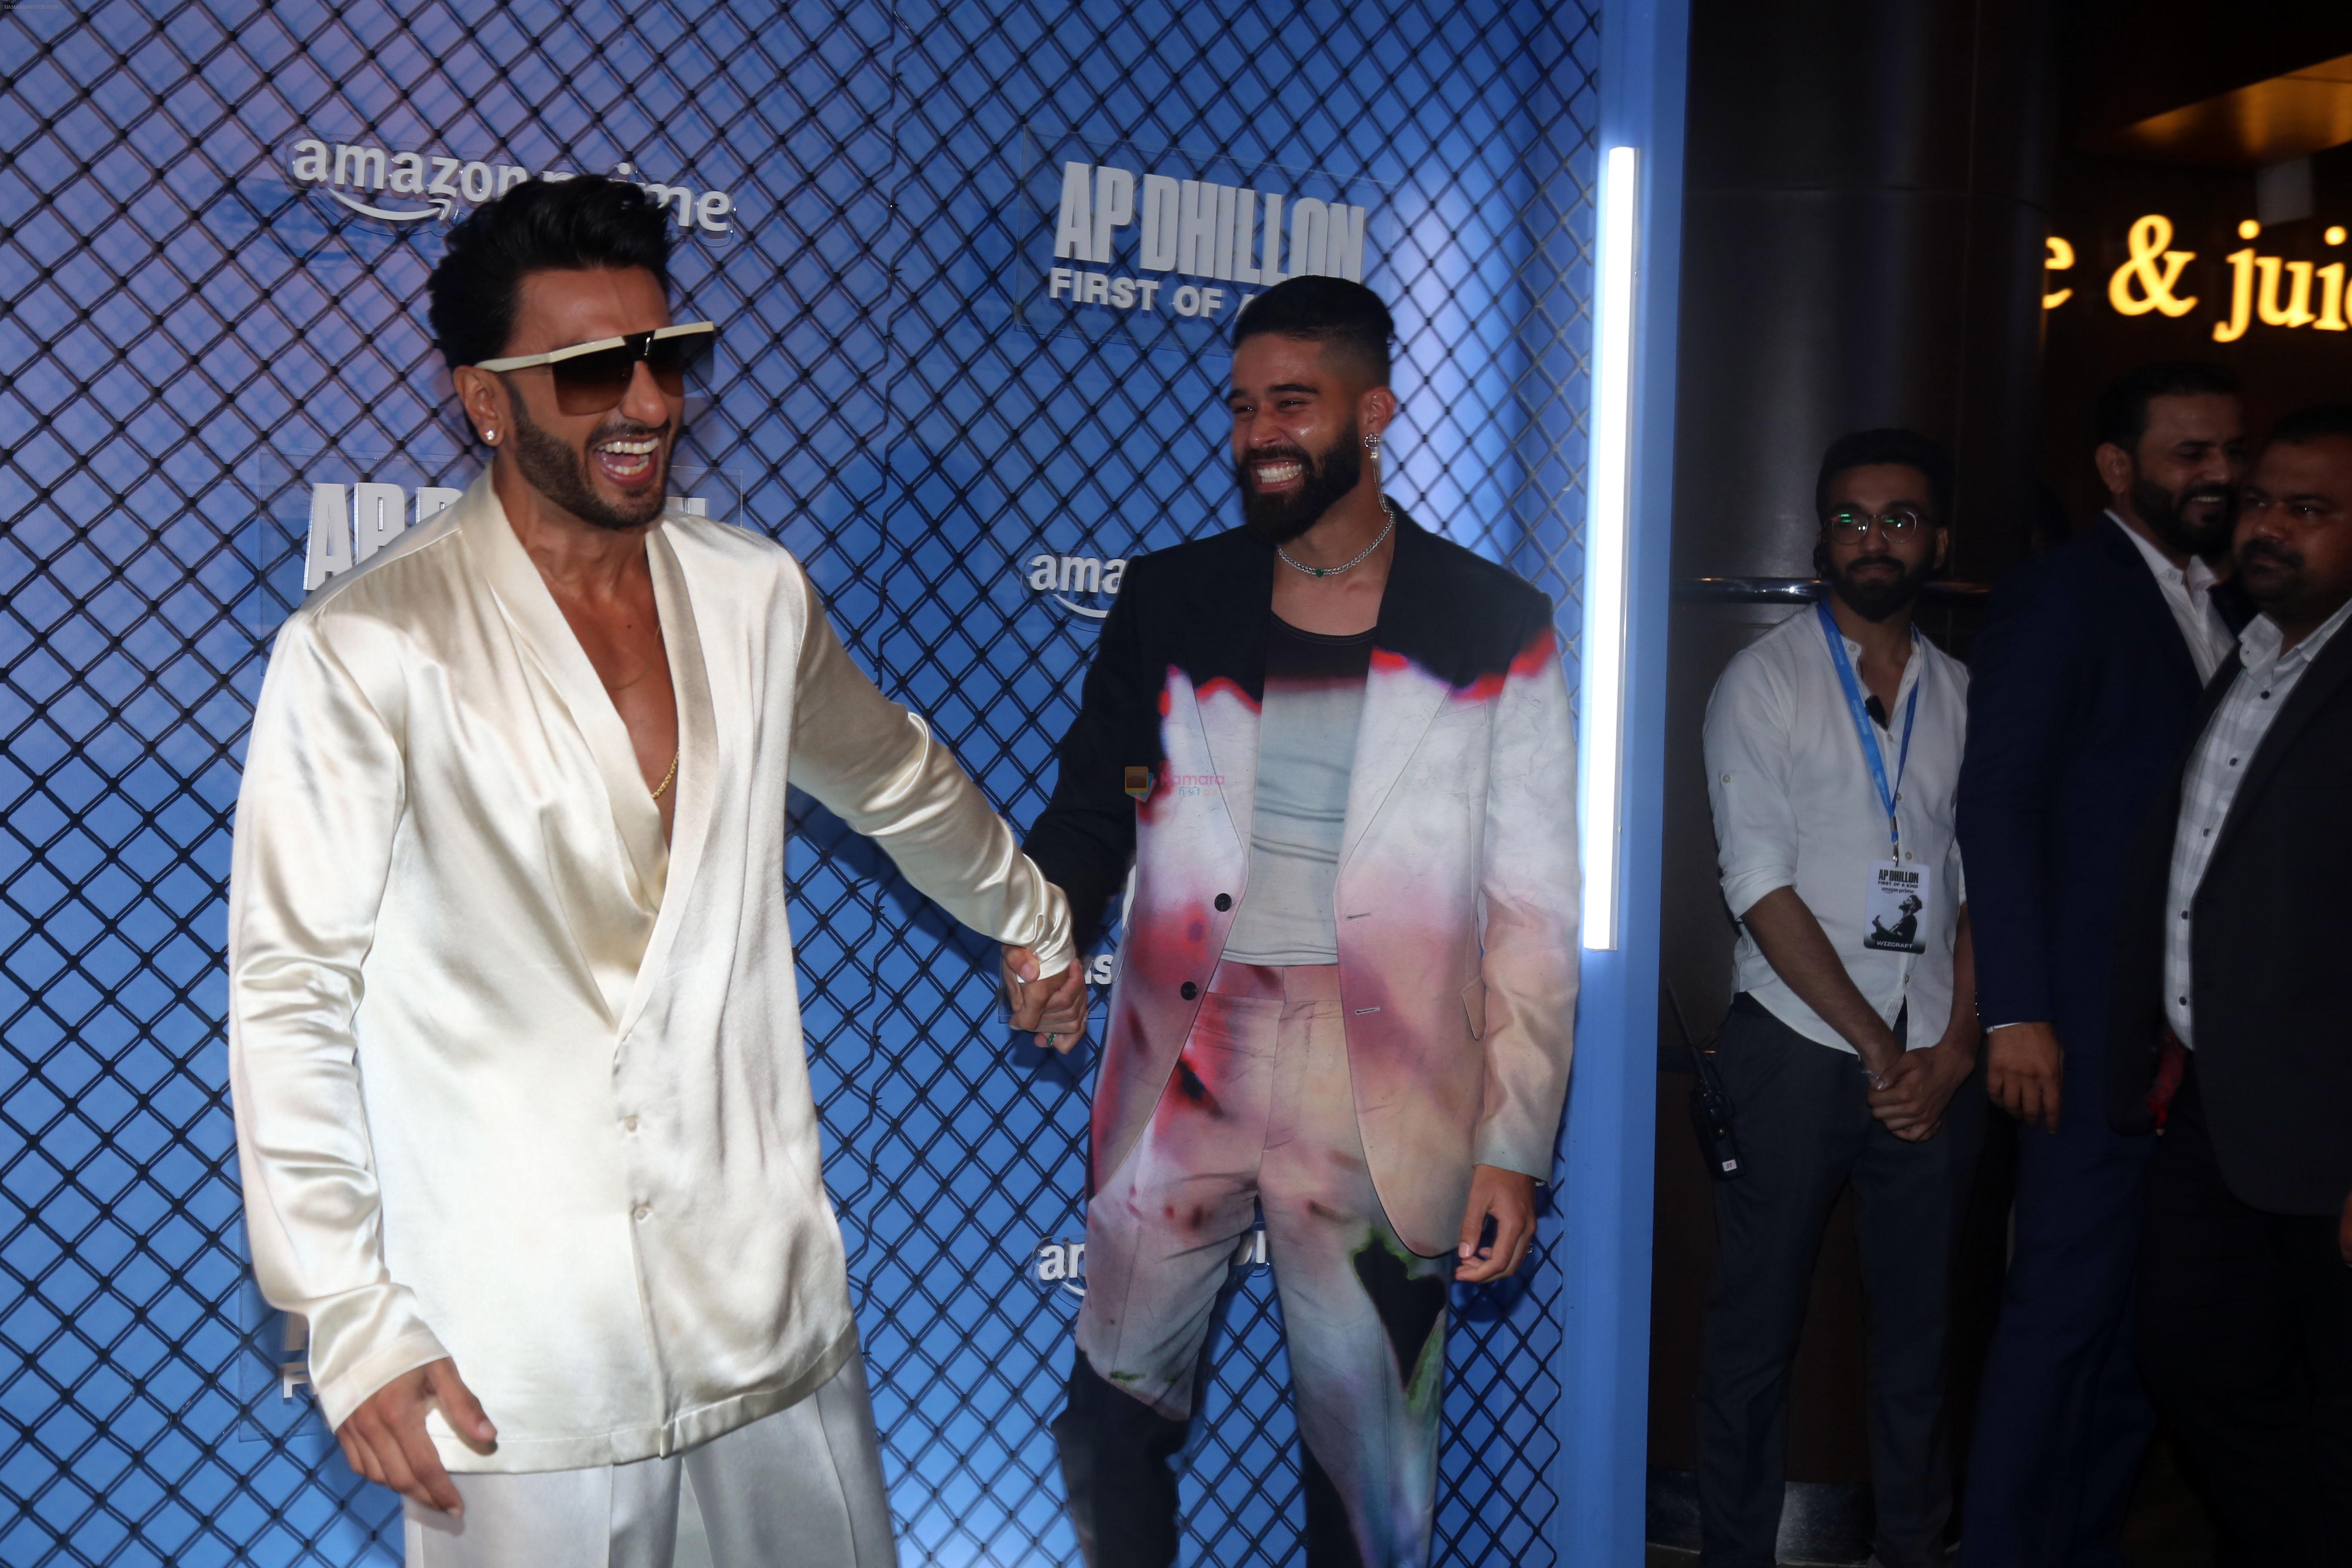 AP Dhillon, Ranveer Singh at the premiere of Docuseries AP Dhillon- First Of A Kind on 16th August 2023